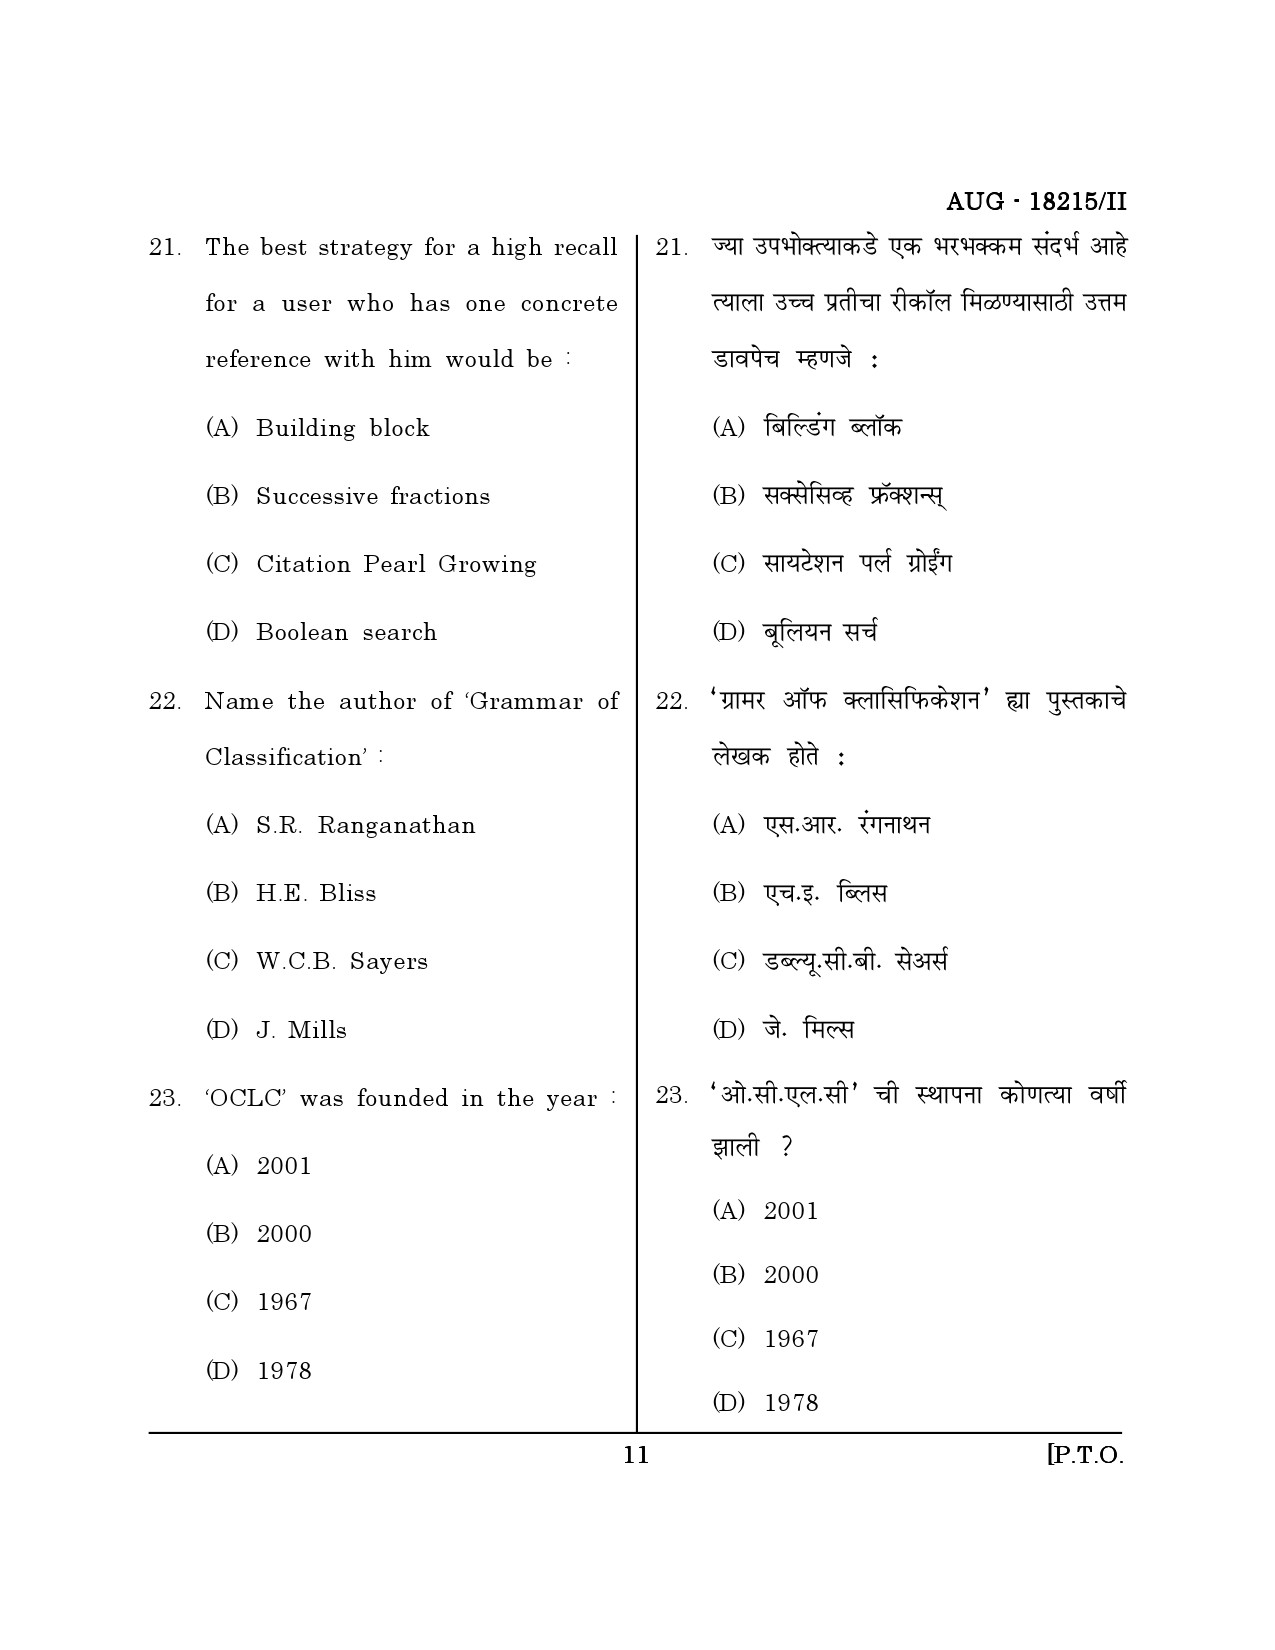 Maharashtra SET Library Information Science Question Paper II August 2015 10